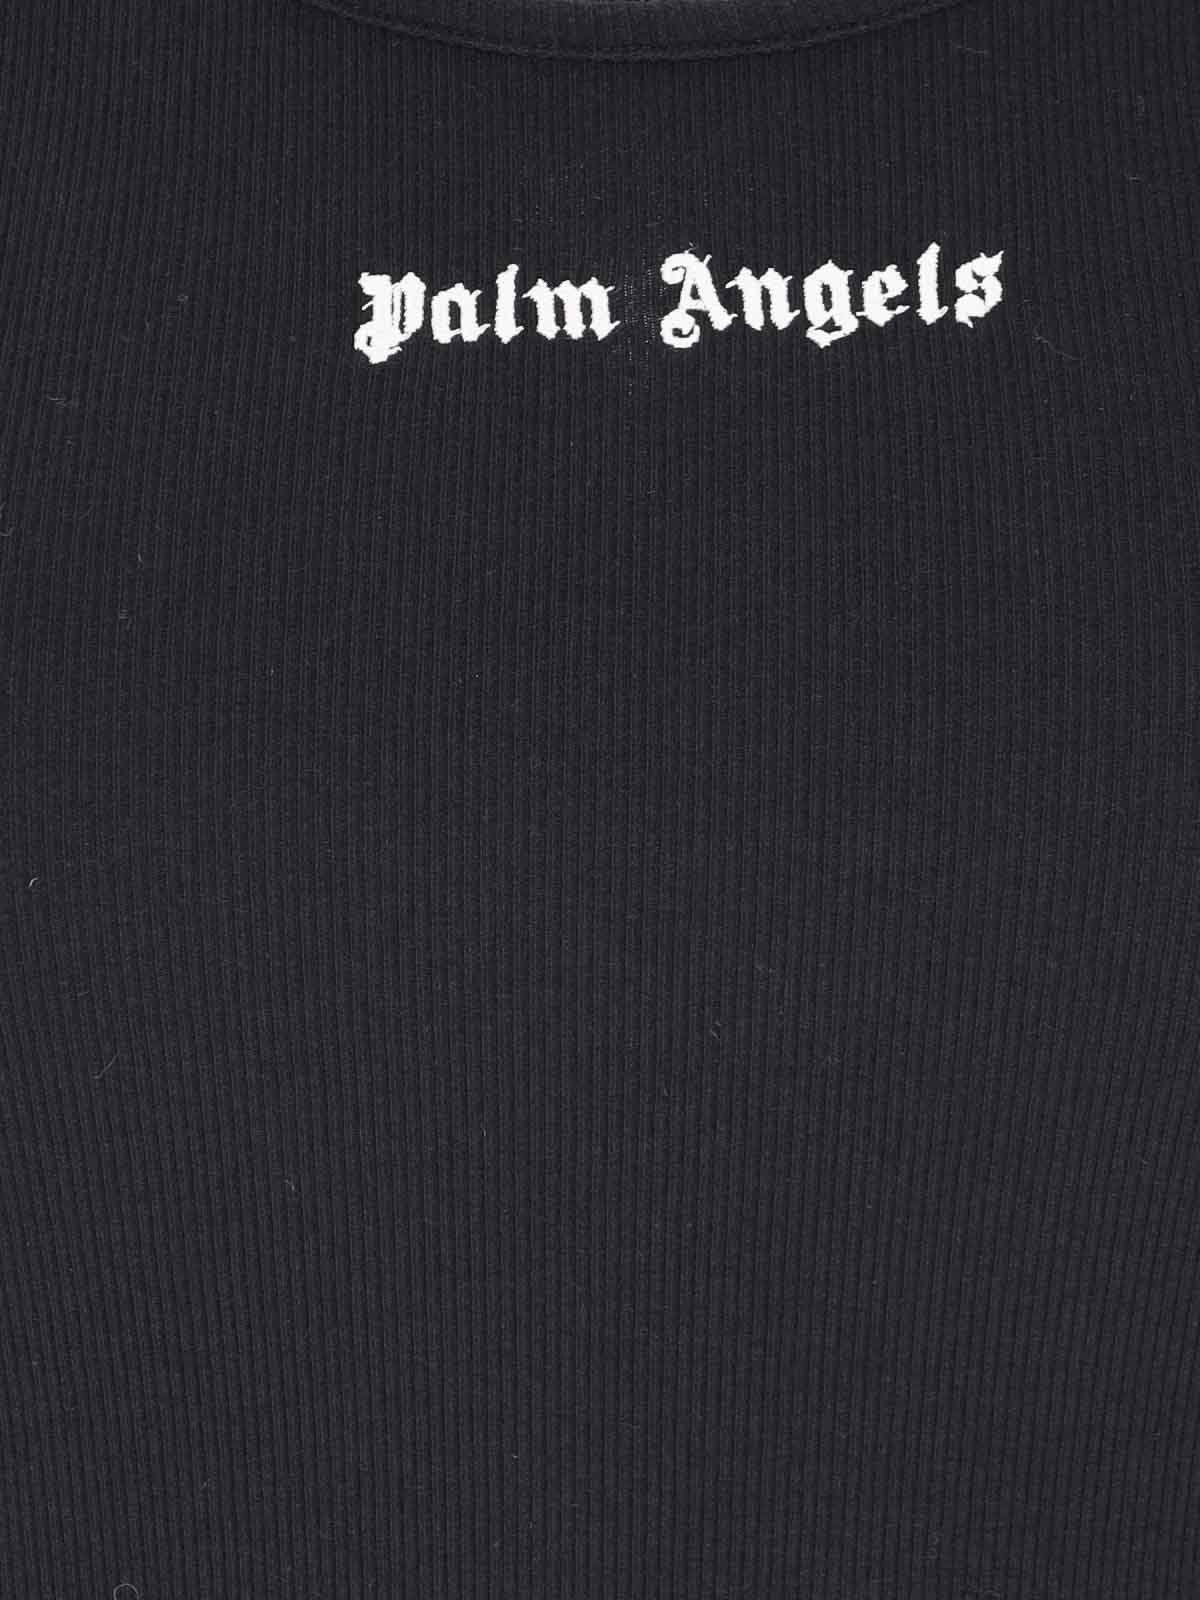 LOGO TANK TOP in black - Palm Angels® Official